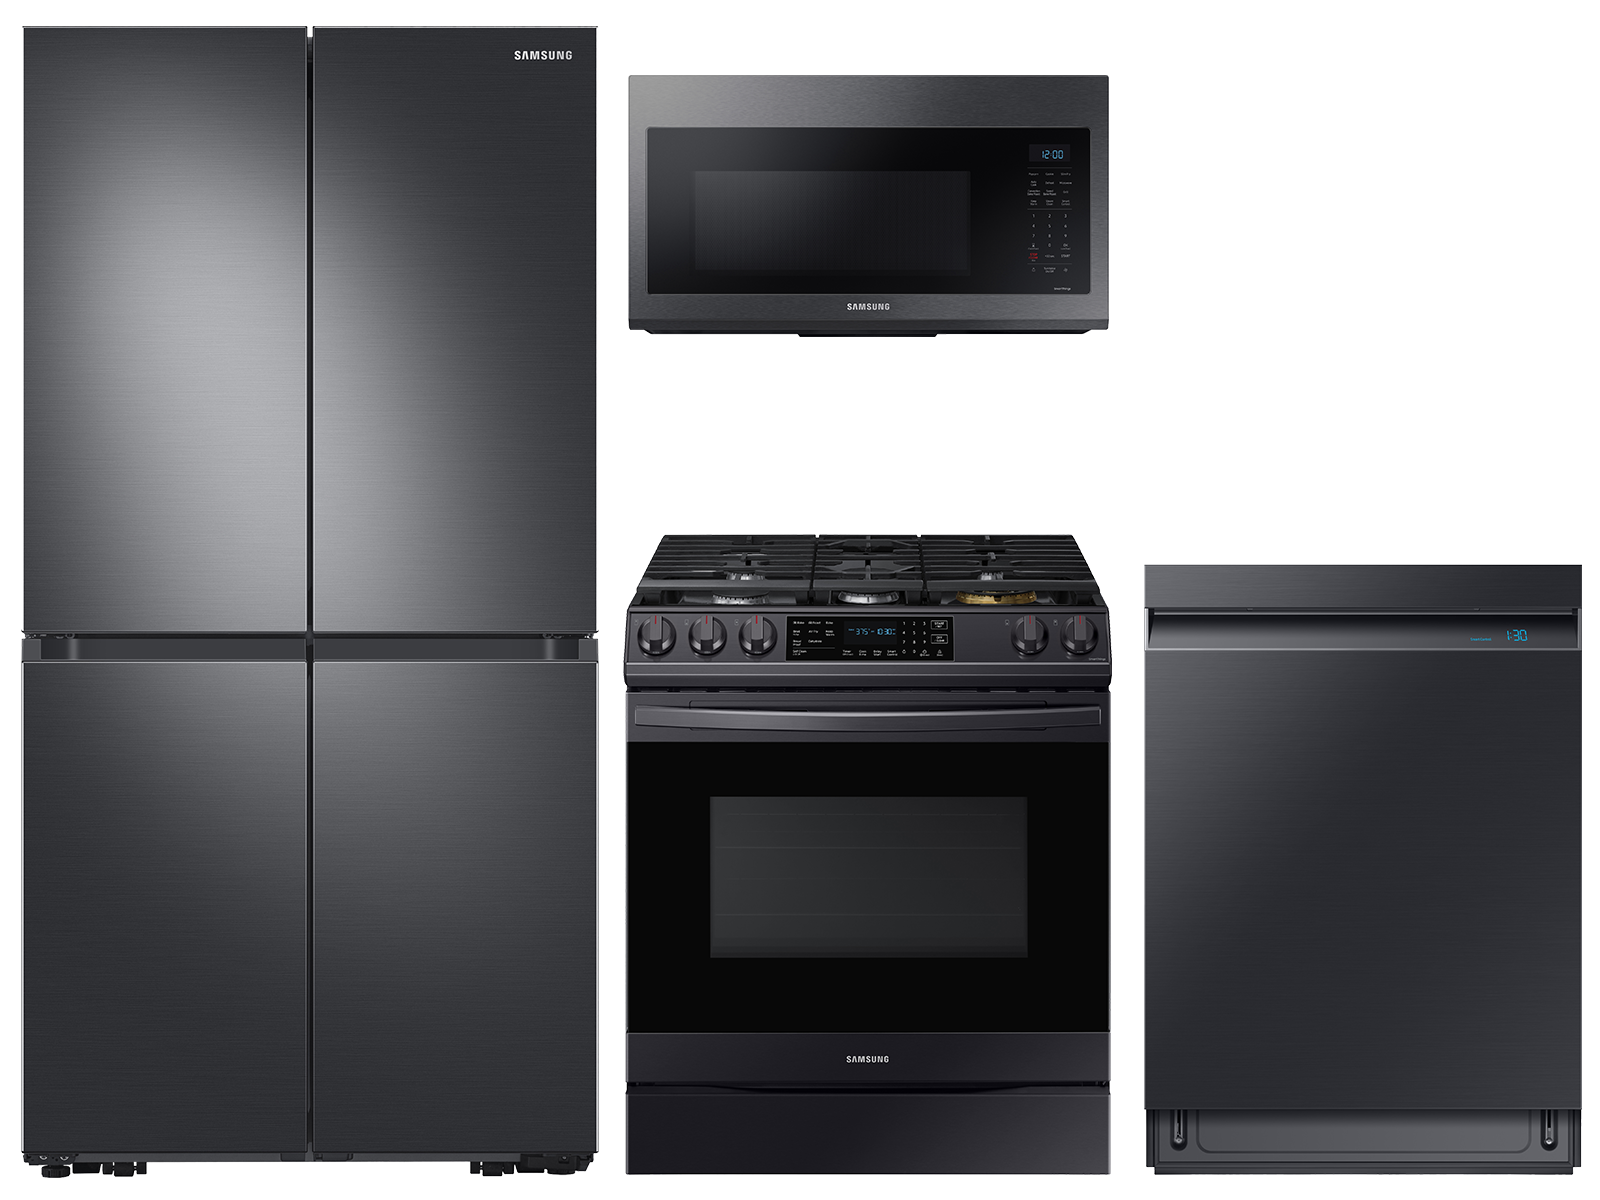 Samsung 29 cu. ft. 4-Door refrigerator, gas range, convection microwave and Smart Linear dishwasher package(BNDL-1623873096360)